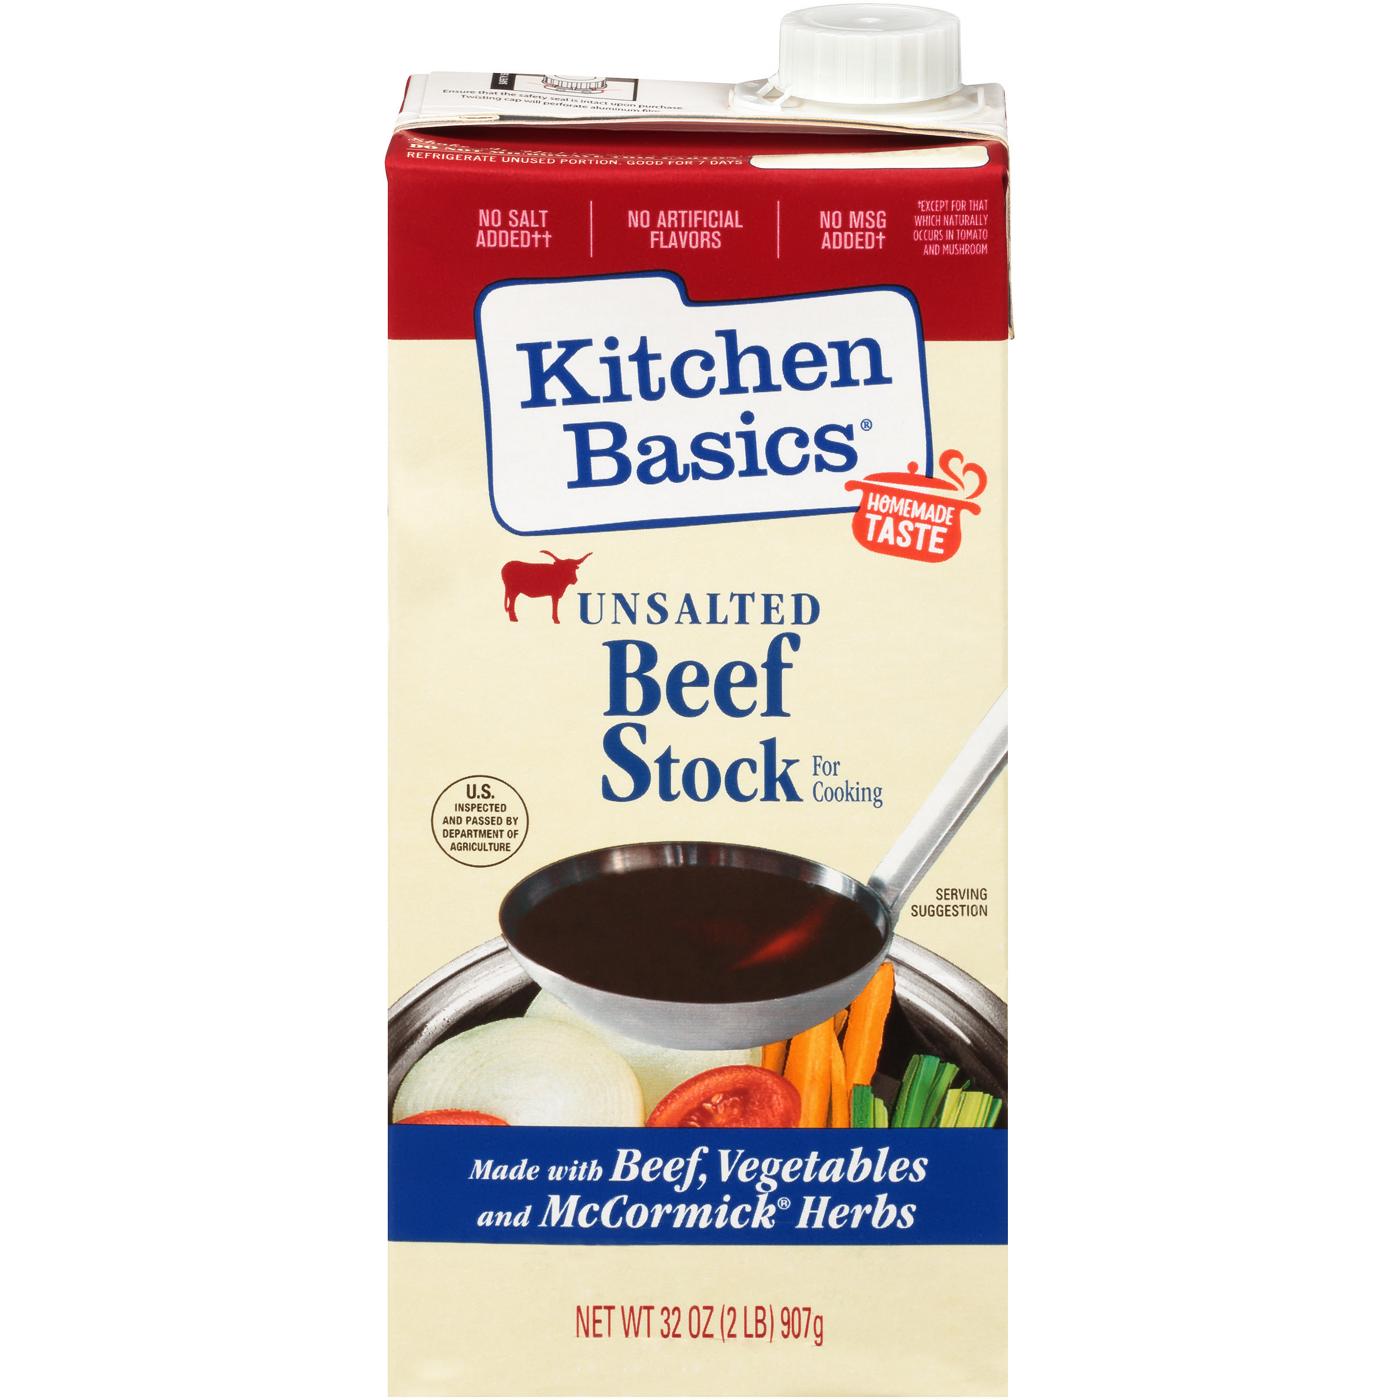 Kitchen Basics Unsalted Beef Stock; image 1 of 11